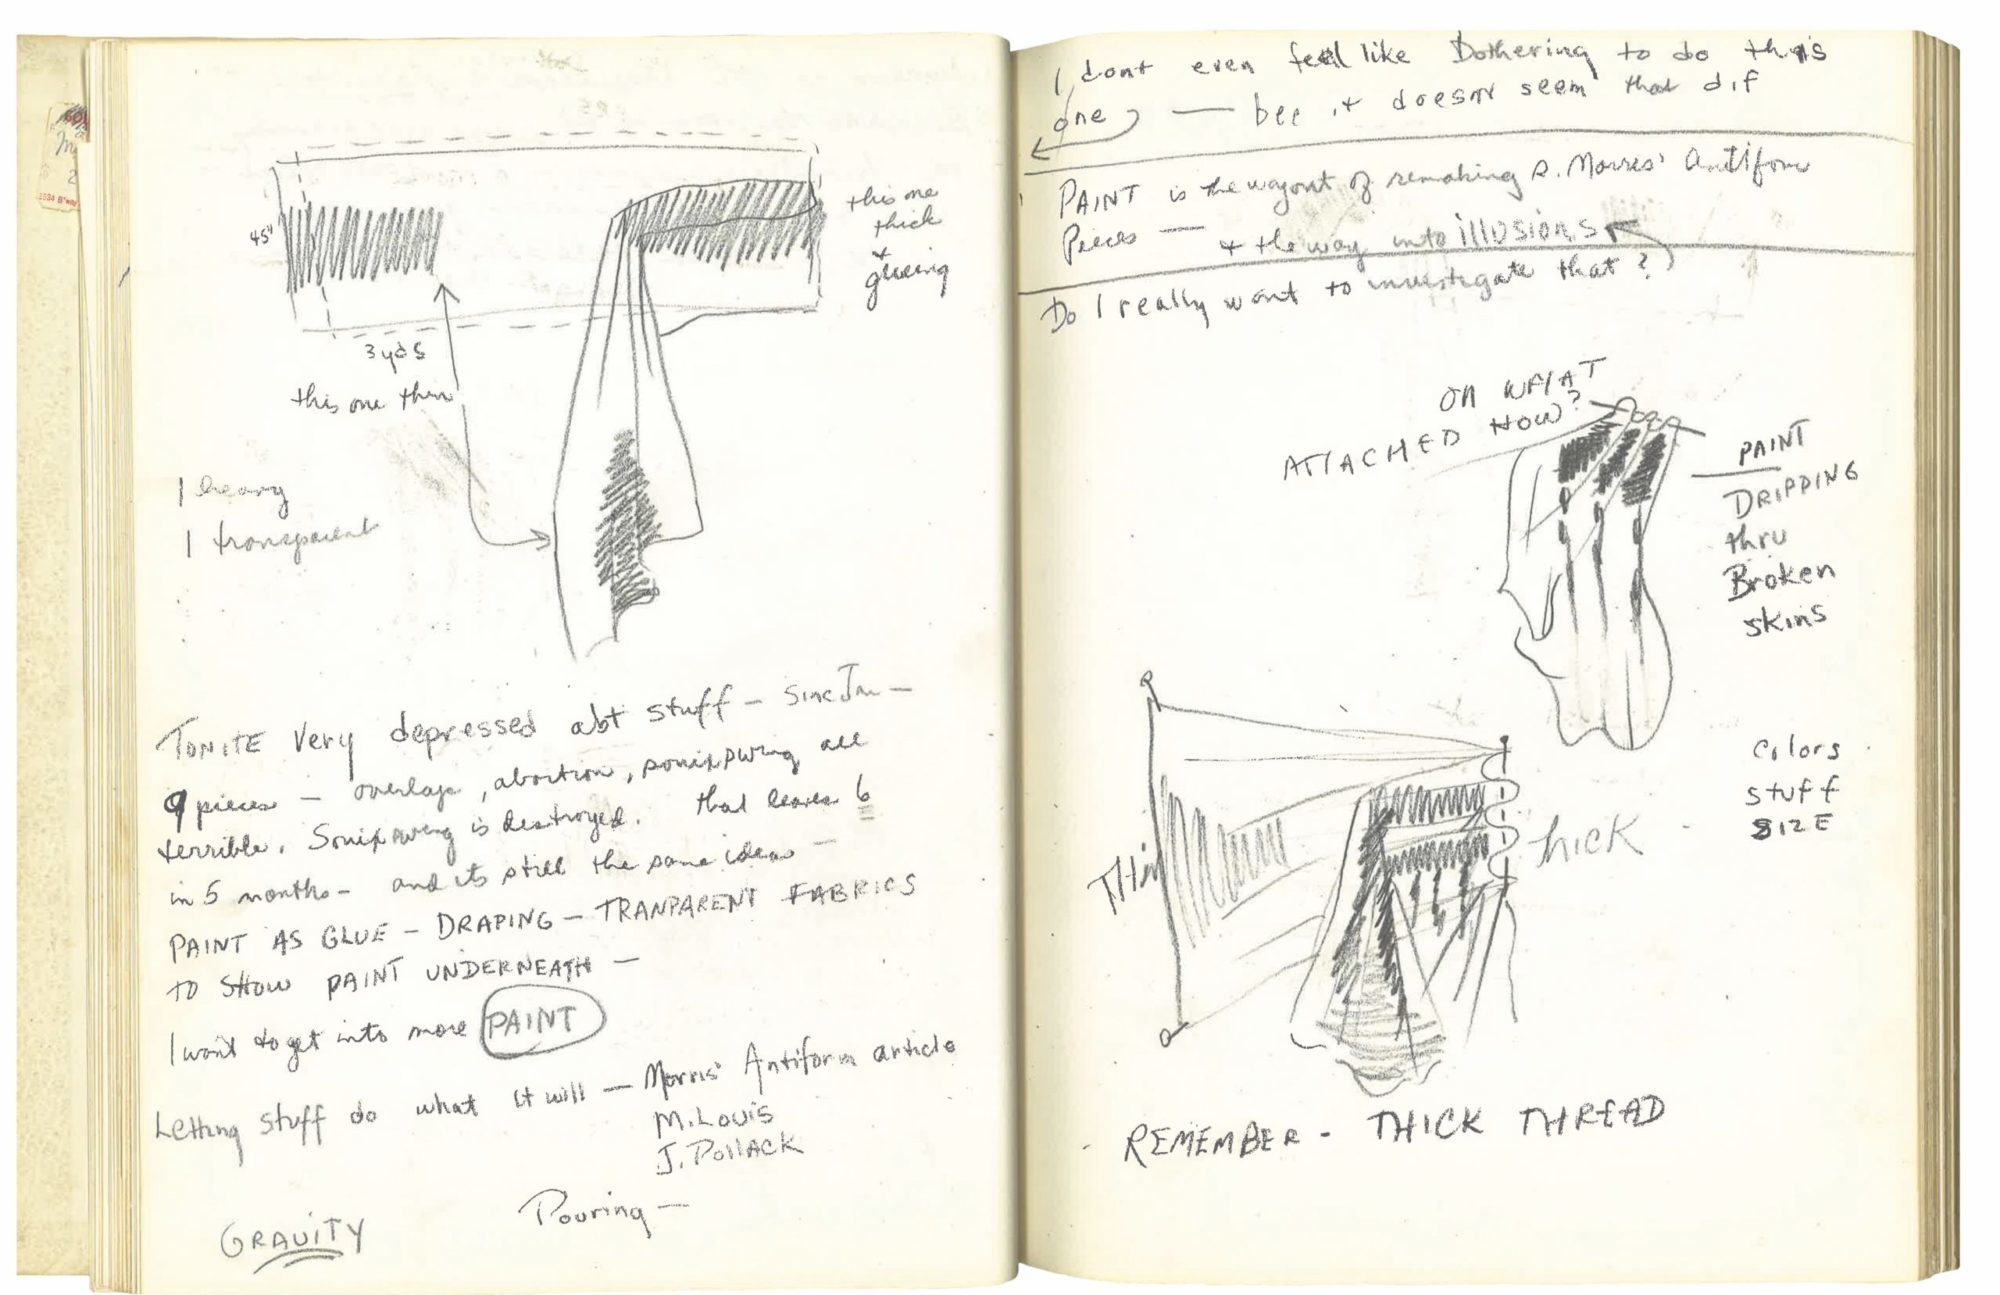 A photograph of a journal opened to two pages. On both pages are diagrams of how to use fabric ., accompanied by text that reads tonite very depressed about stuff ... paint as glue, draping, trasnsparent fabrics, letting stuff do what it will, gravity. The pages are yellowed at the edges, and the writing is in pencil.